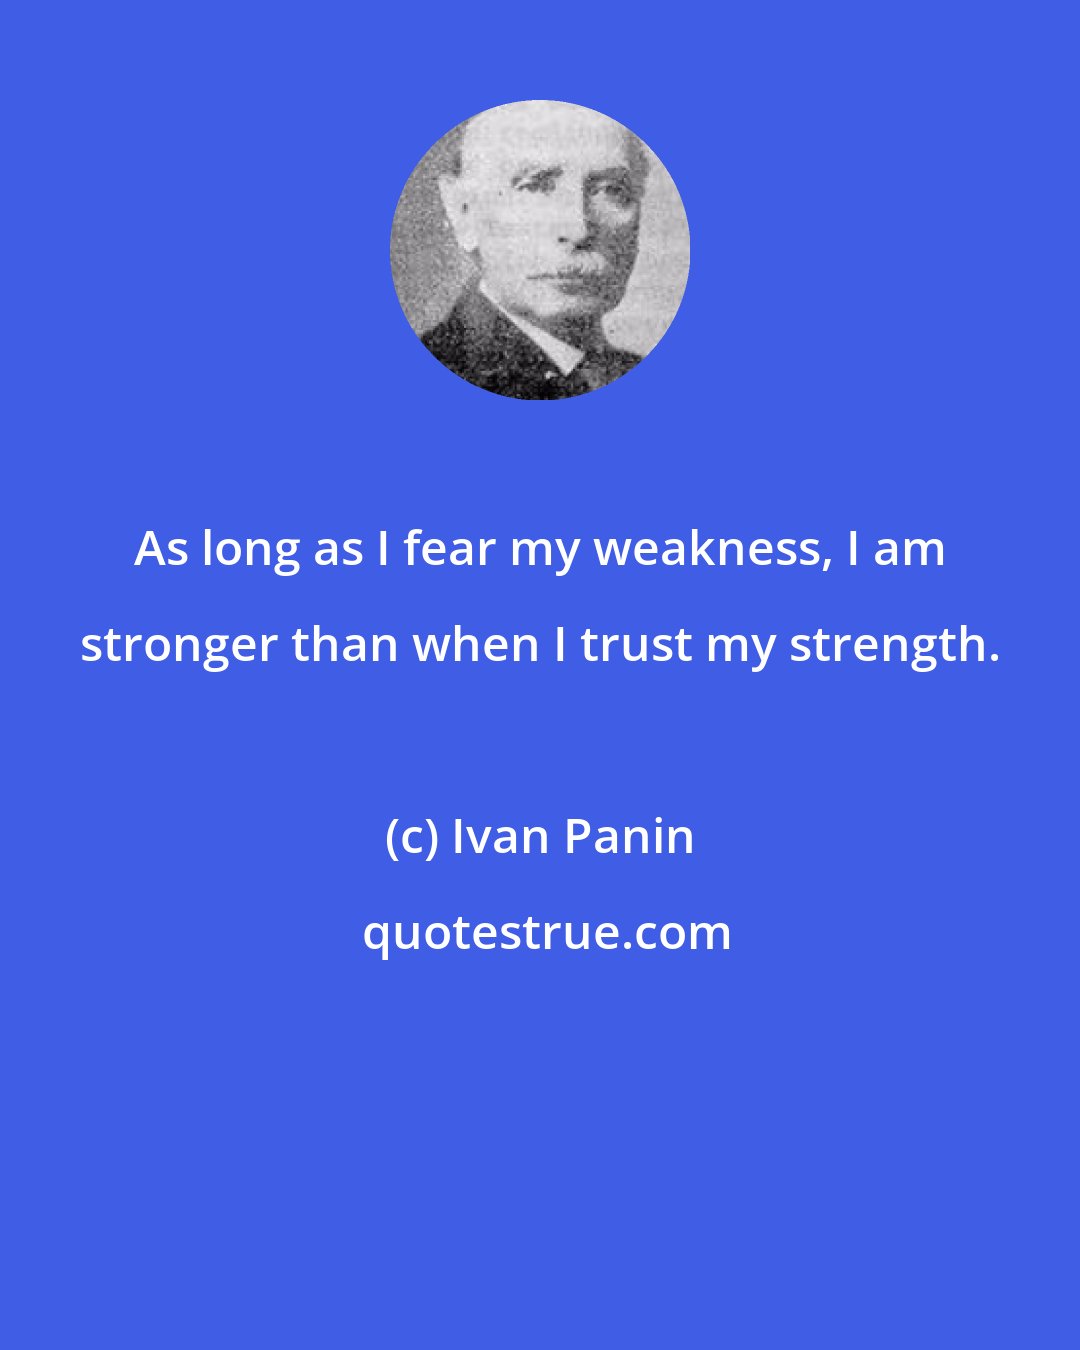 Ivan Panin: As long as I fear my weakness, I am stronger than when I trust my strength.